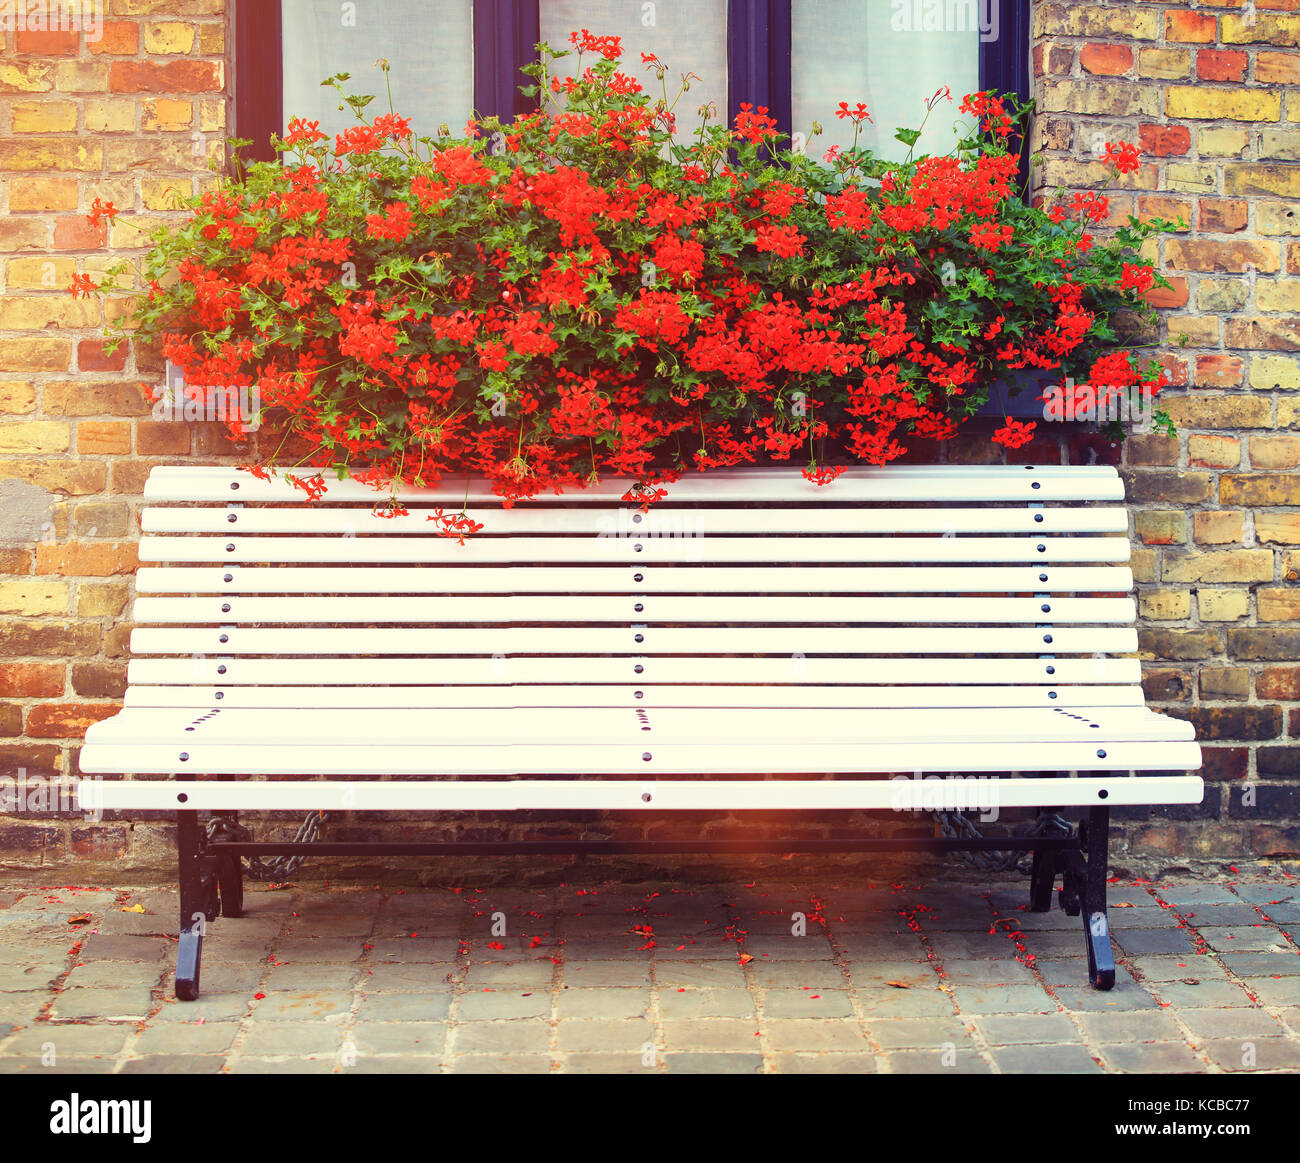 White bench with red flowers on brick wall background. Street view of Brugge Belgium. Stock Photo